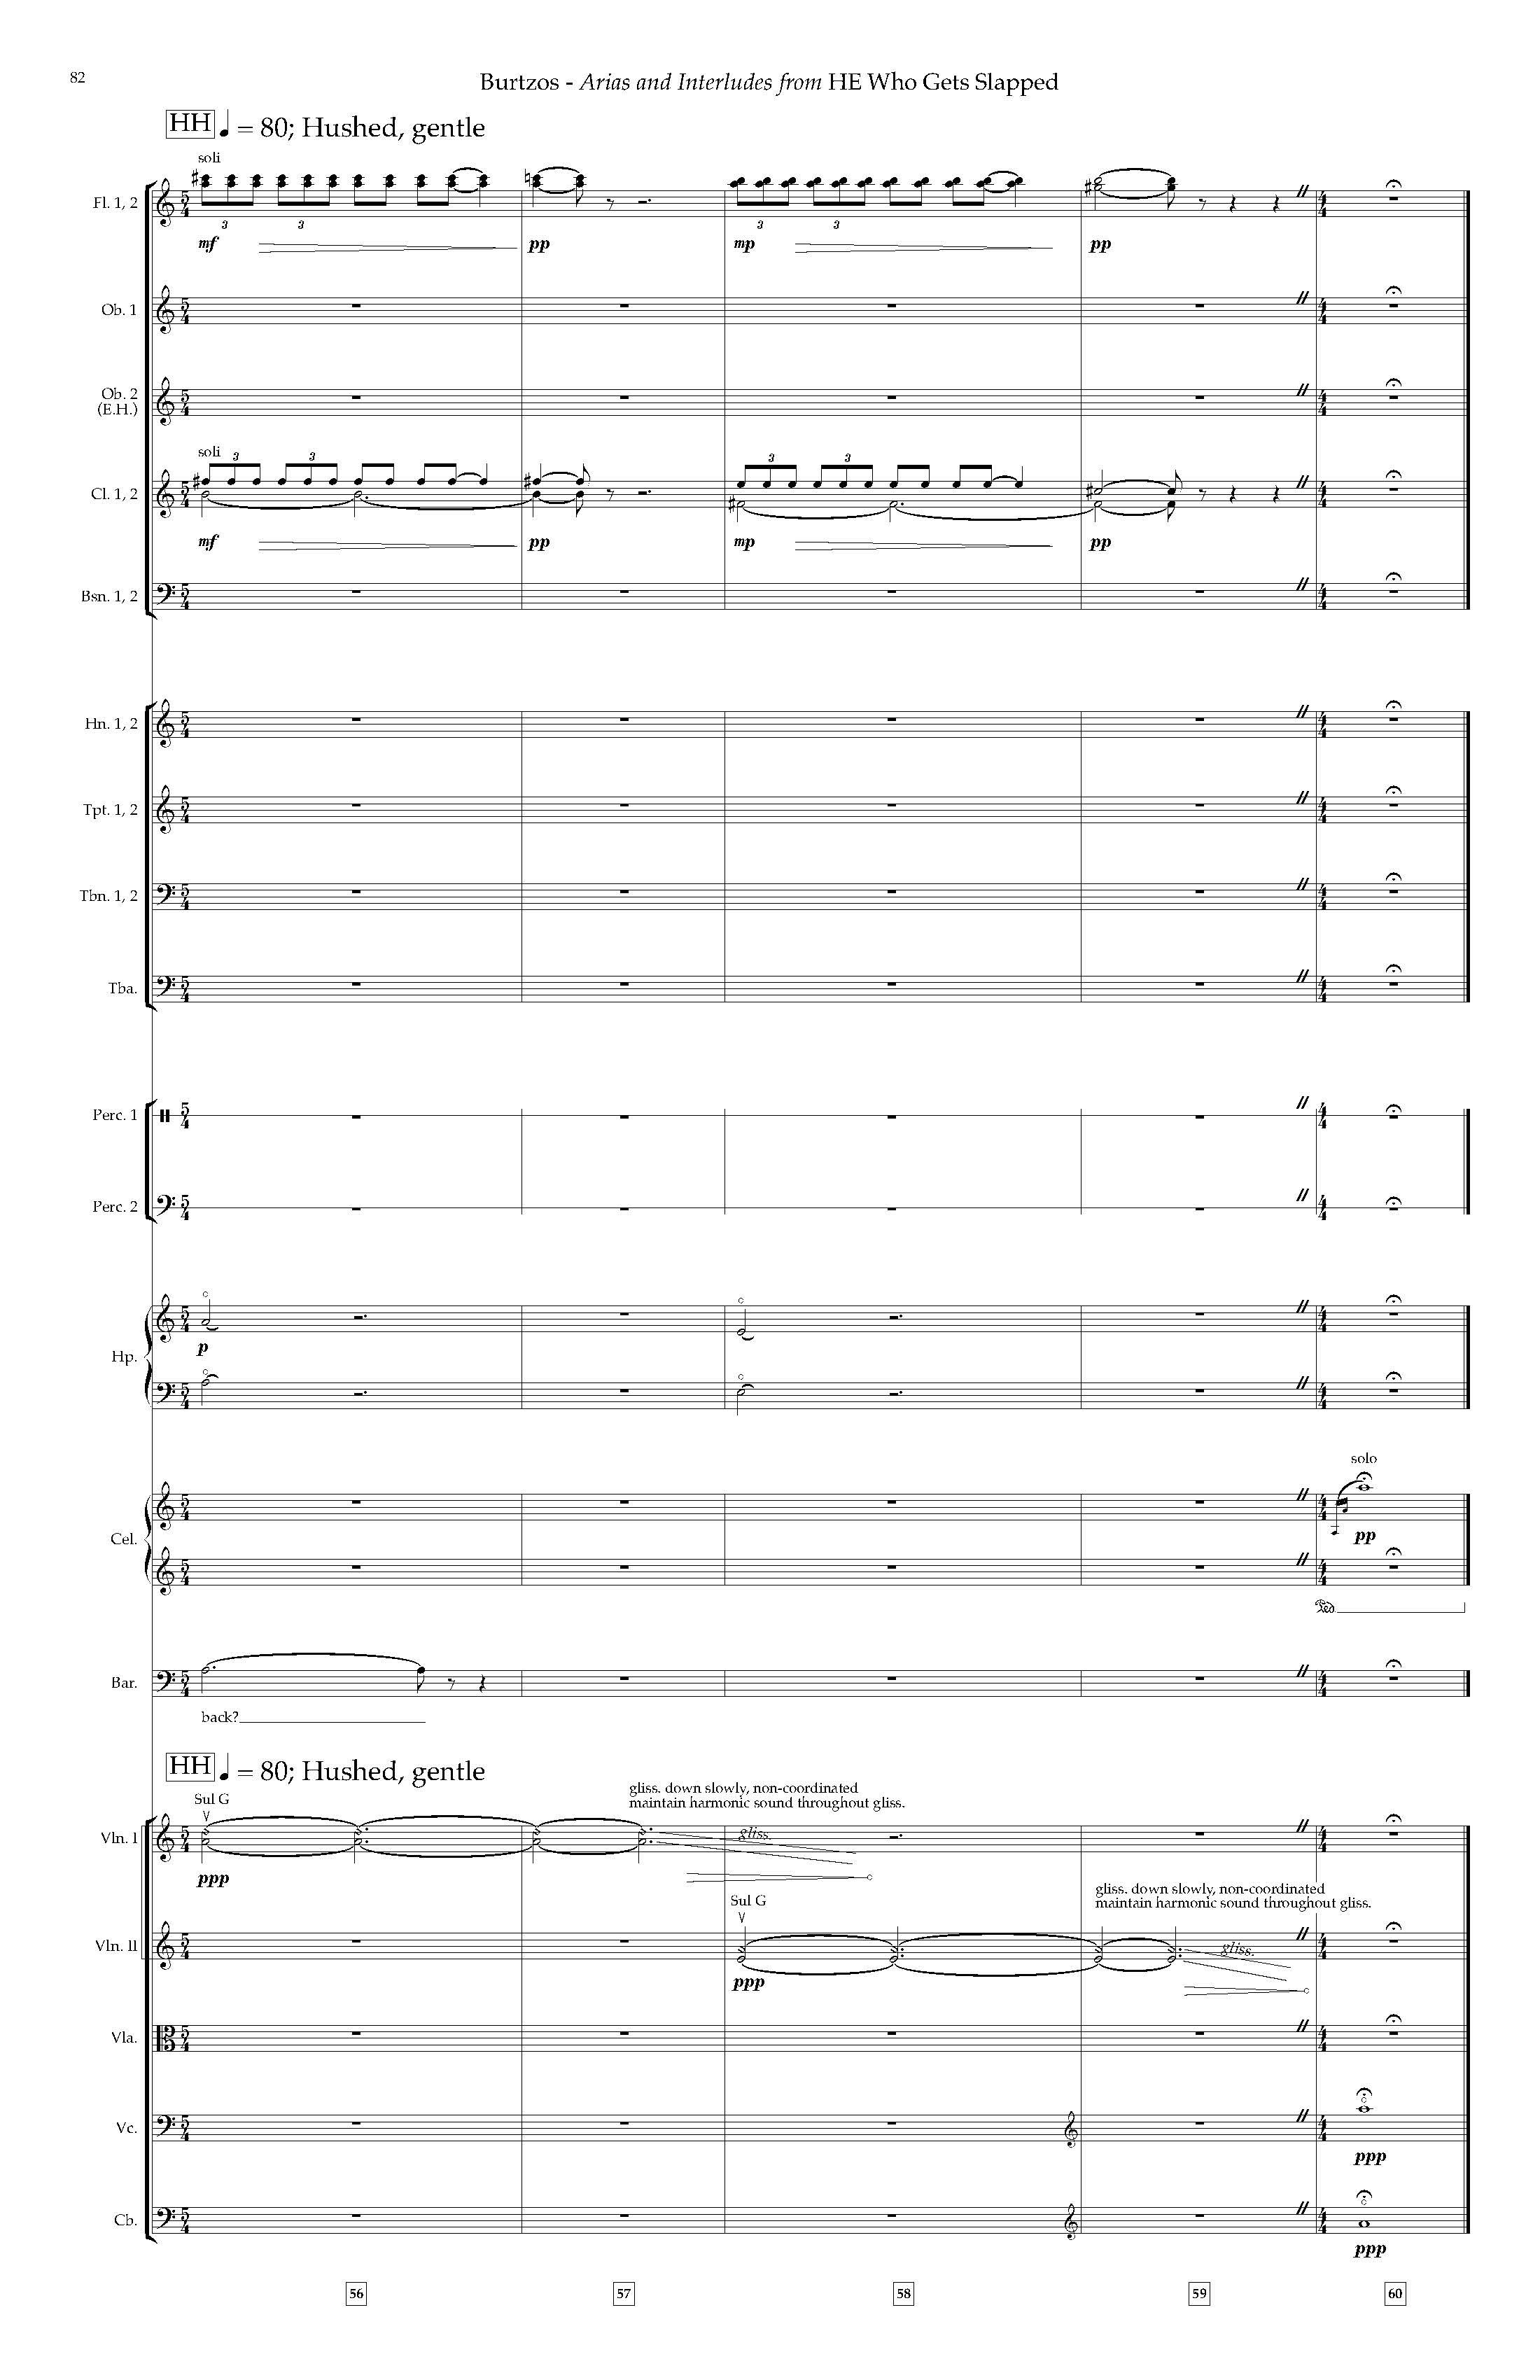 Arias and Interludes from HWGS - Complete Score_Page_88.jpg